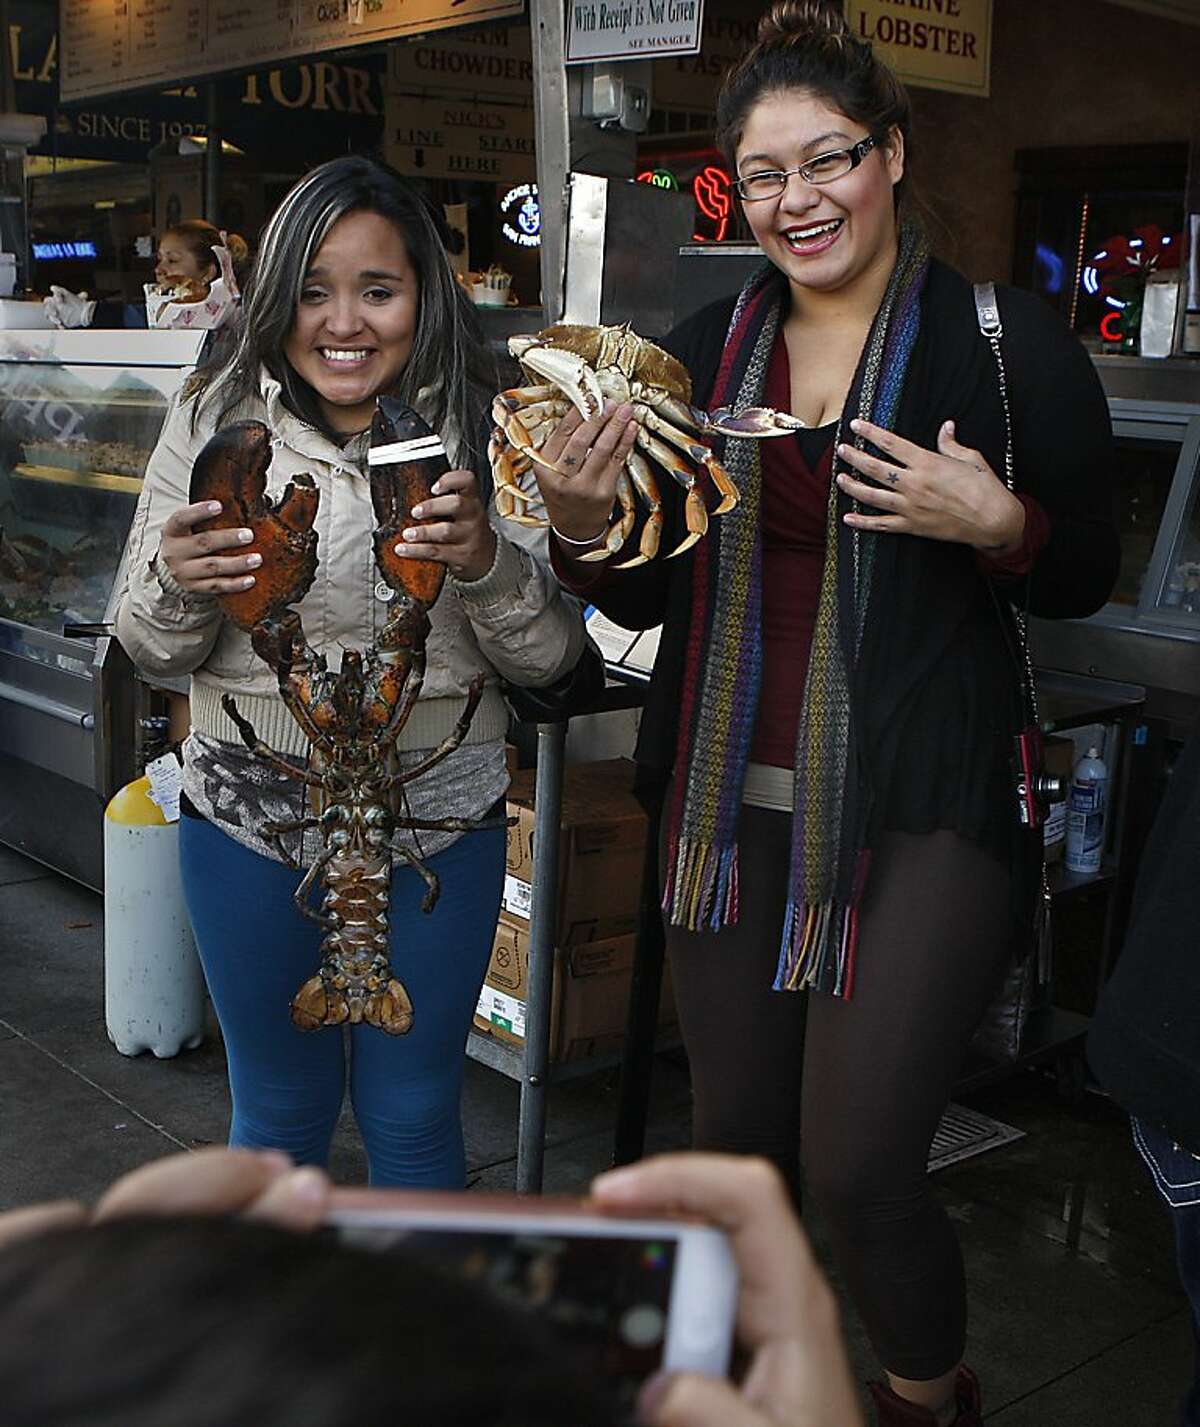 Sisters from out of town pose with a live lobster and crab at Nick's Lighthouse, a wharf restaurant destination since 1934, in San Francisco, Calif., for their nephew/son on Monday, December 2, 2013.